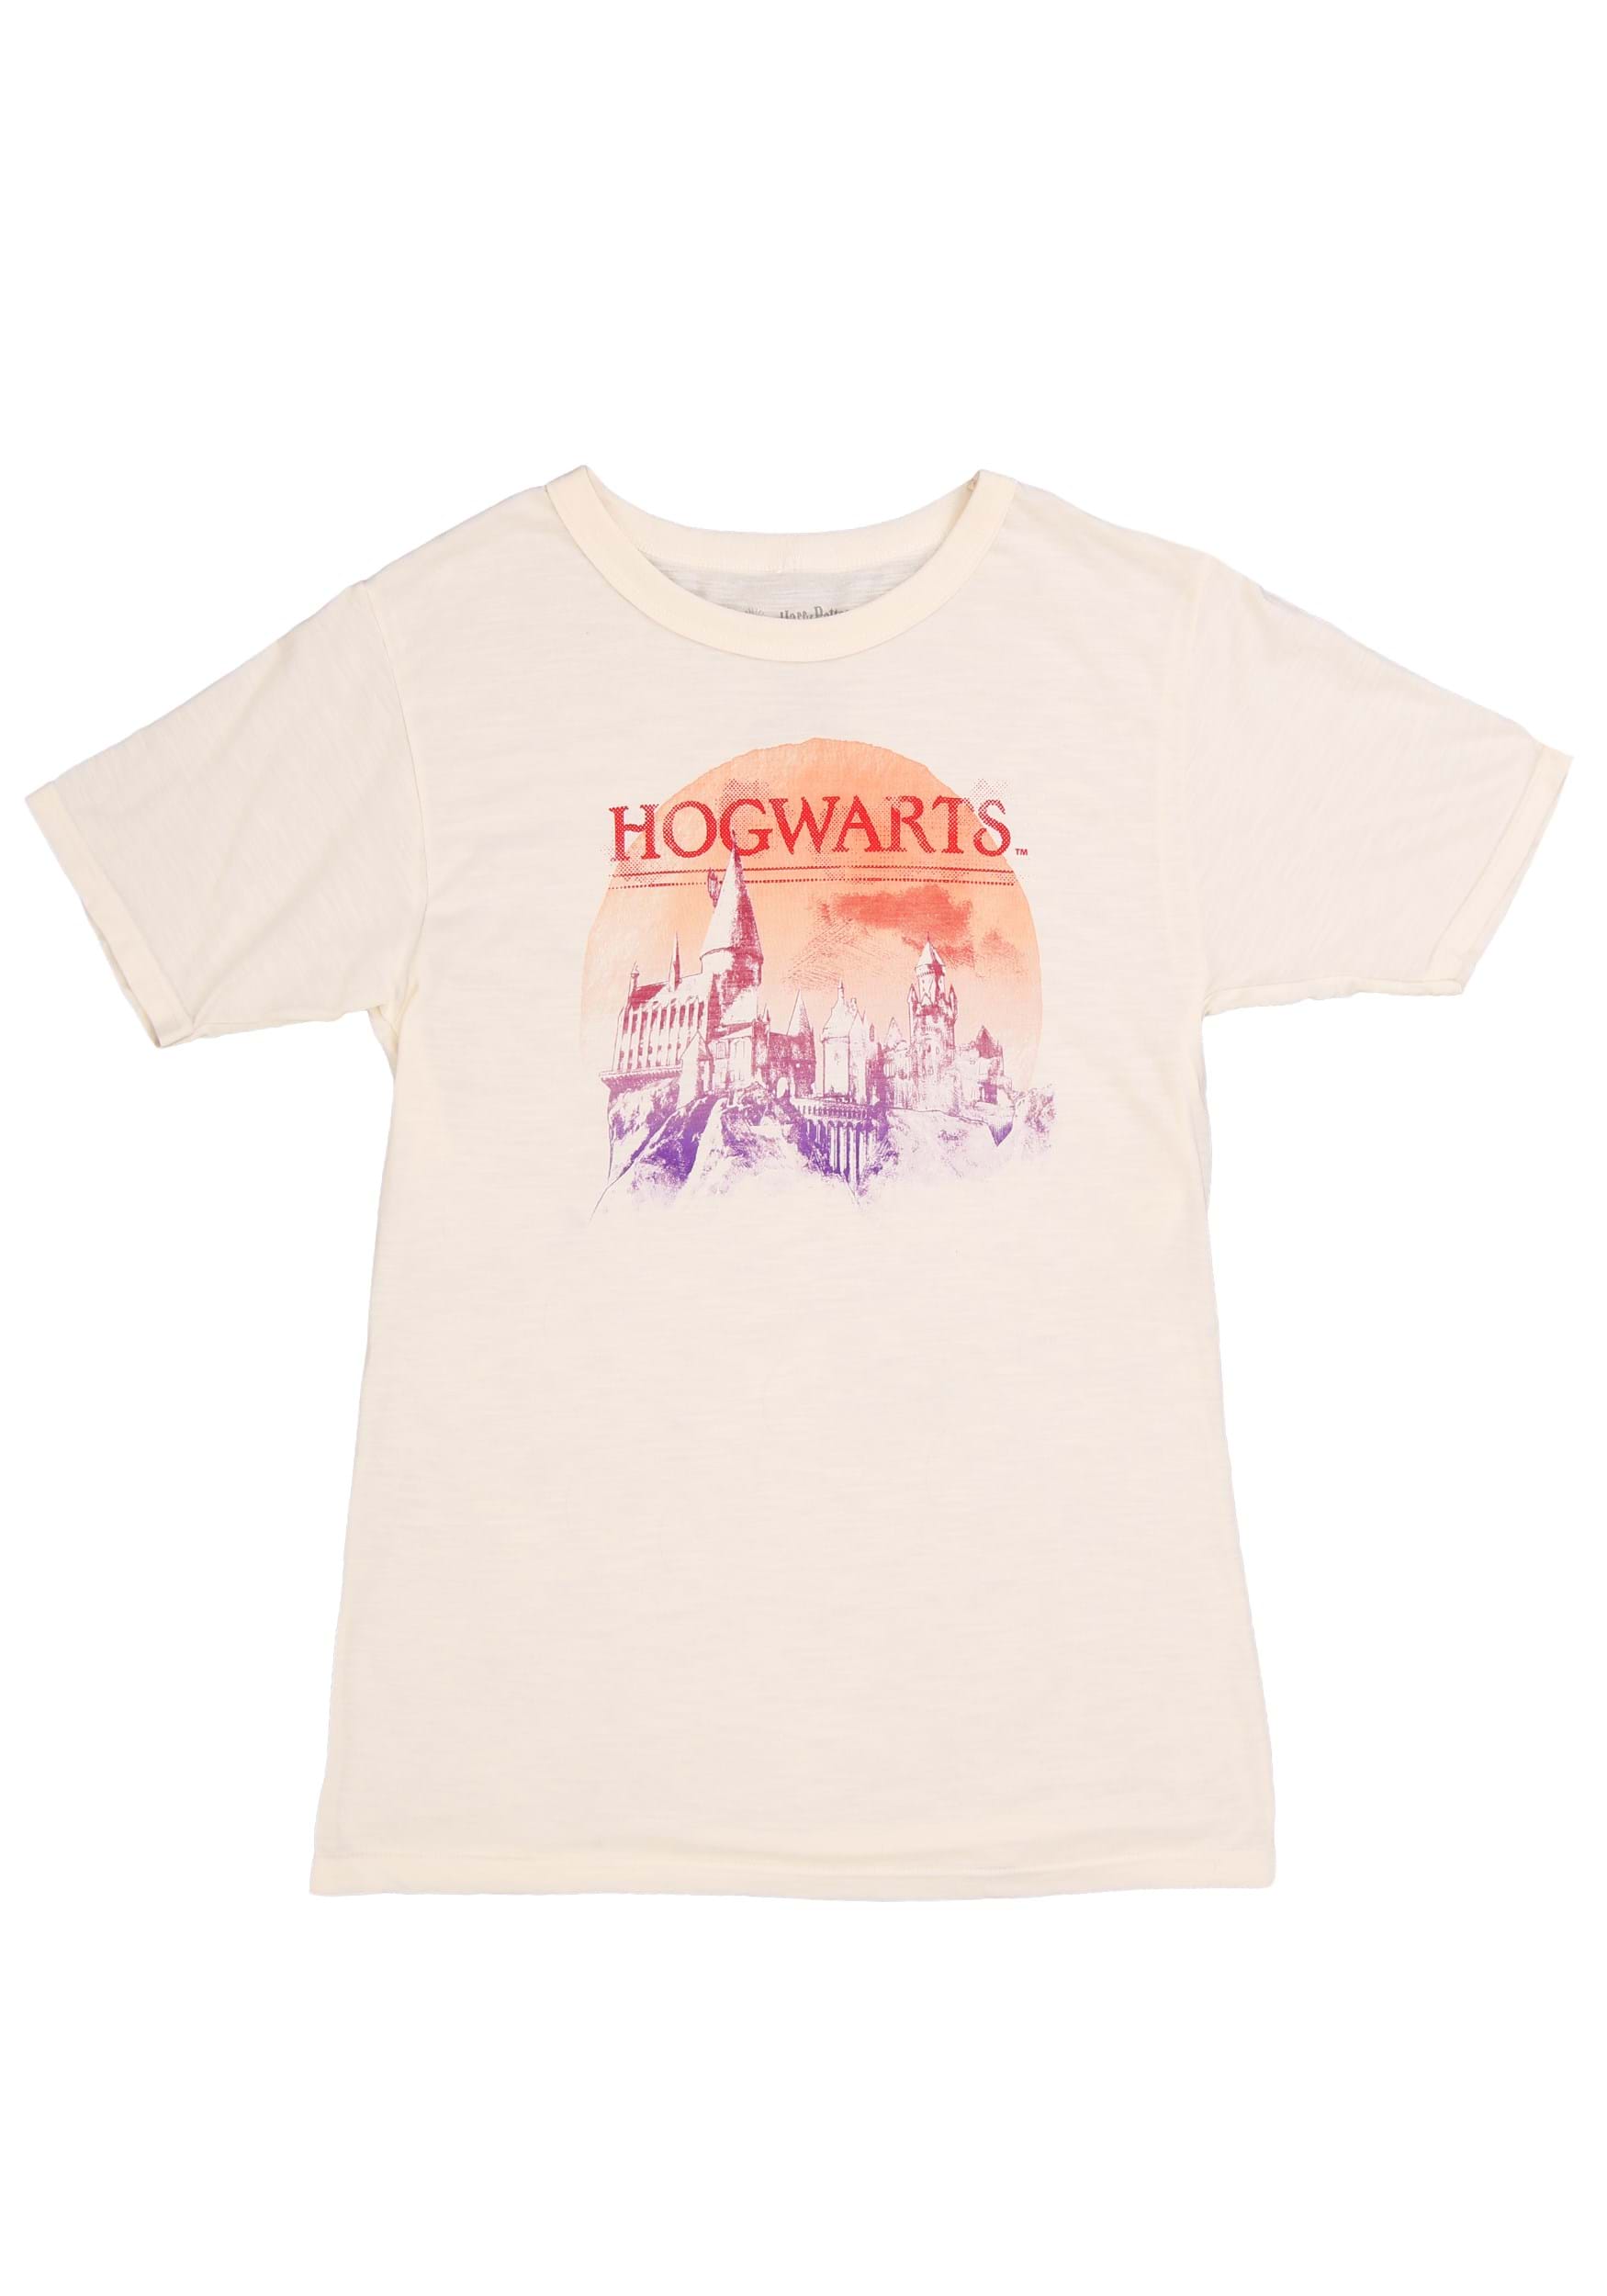 Harry Potter - Hogwarts (Front/Back Print) - Long Sleeve Adult Poly Crew - White T-Shirt